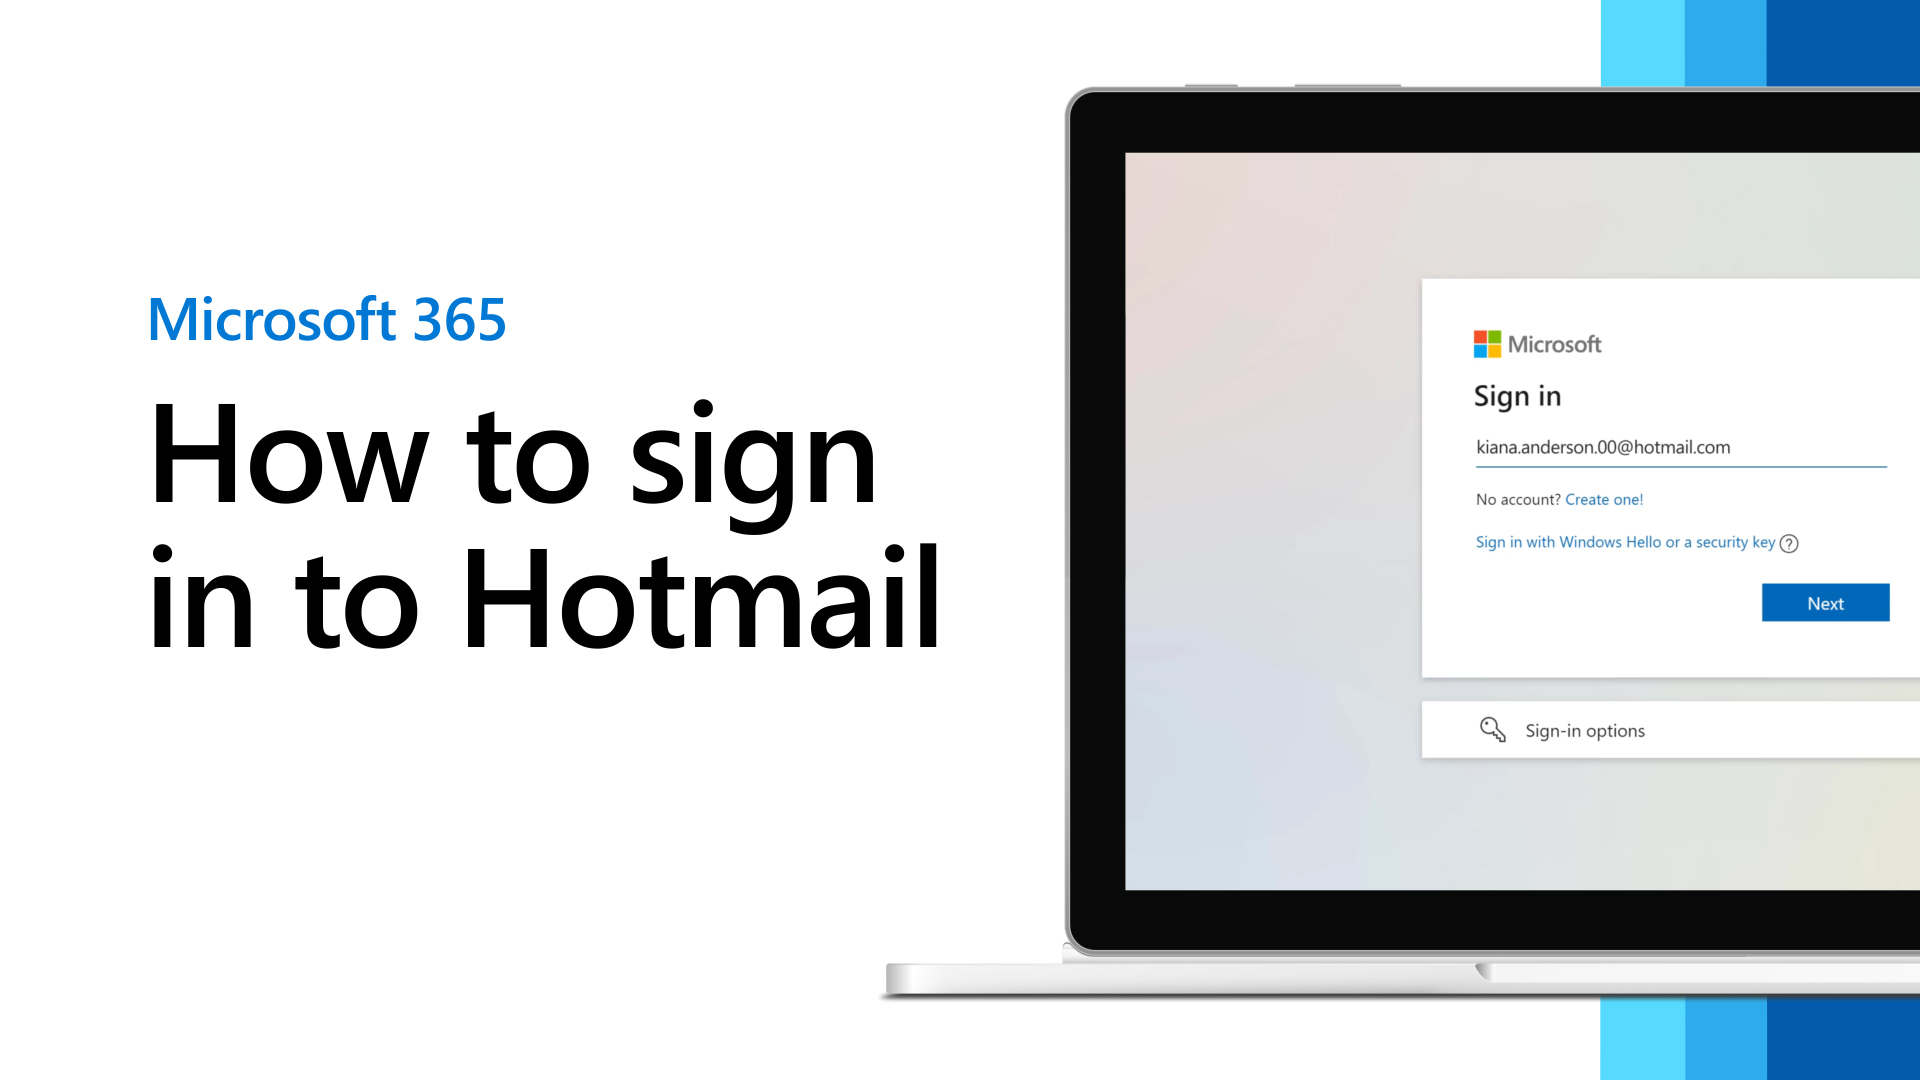 Hotmail Login – How to Sign In to Your Hotmail.com Account